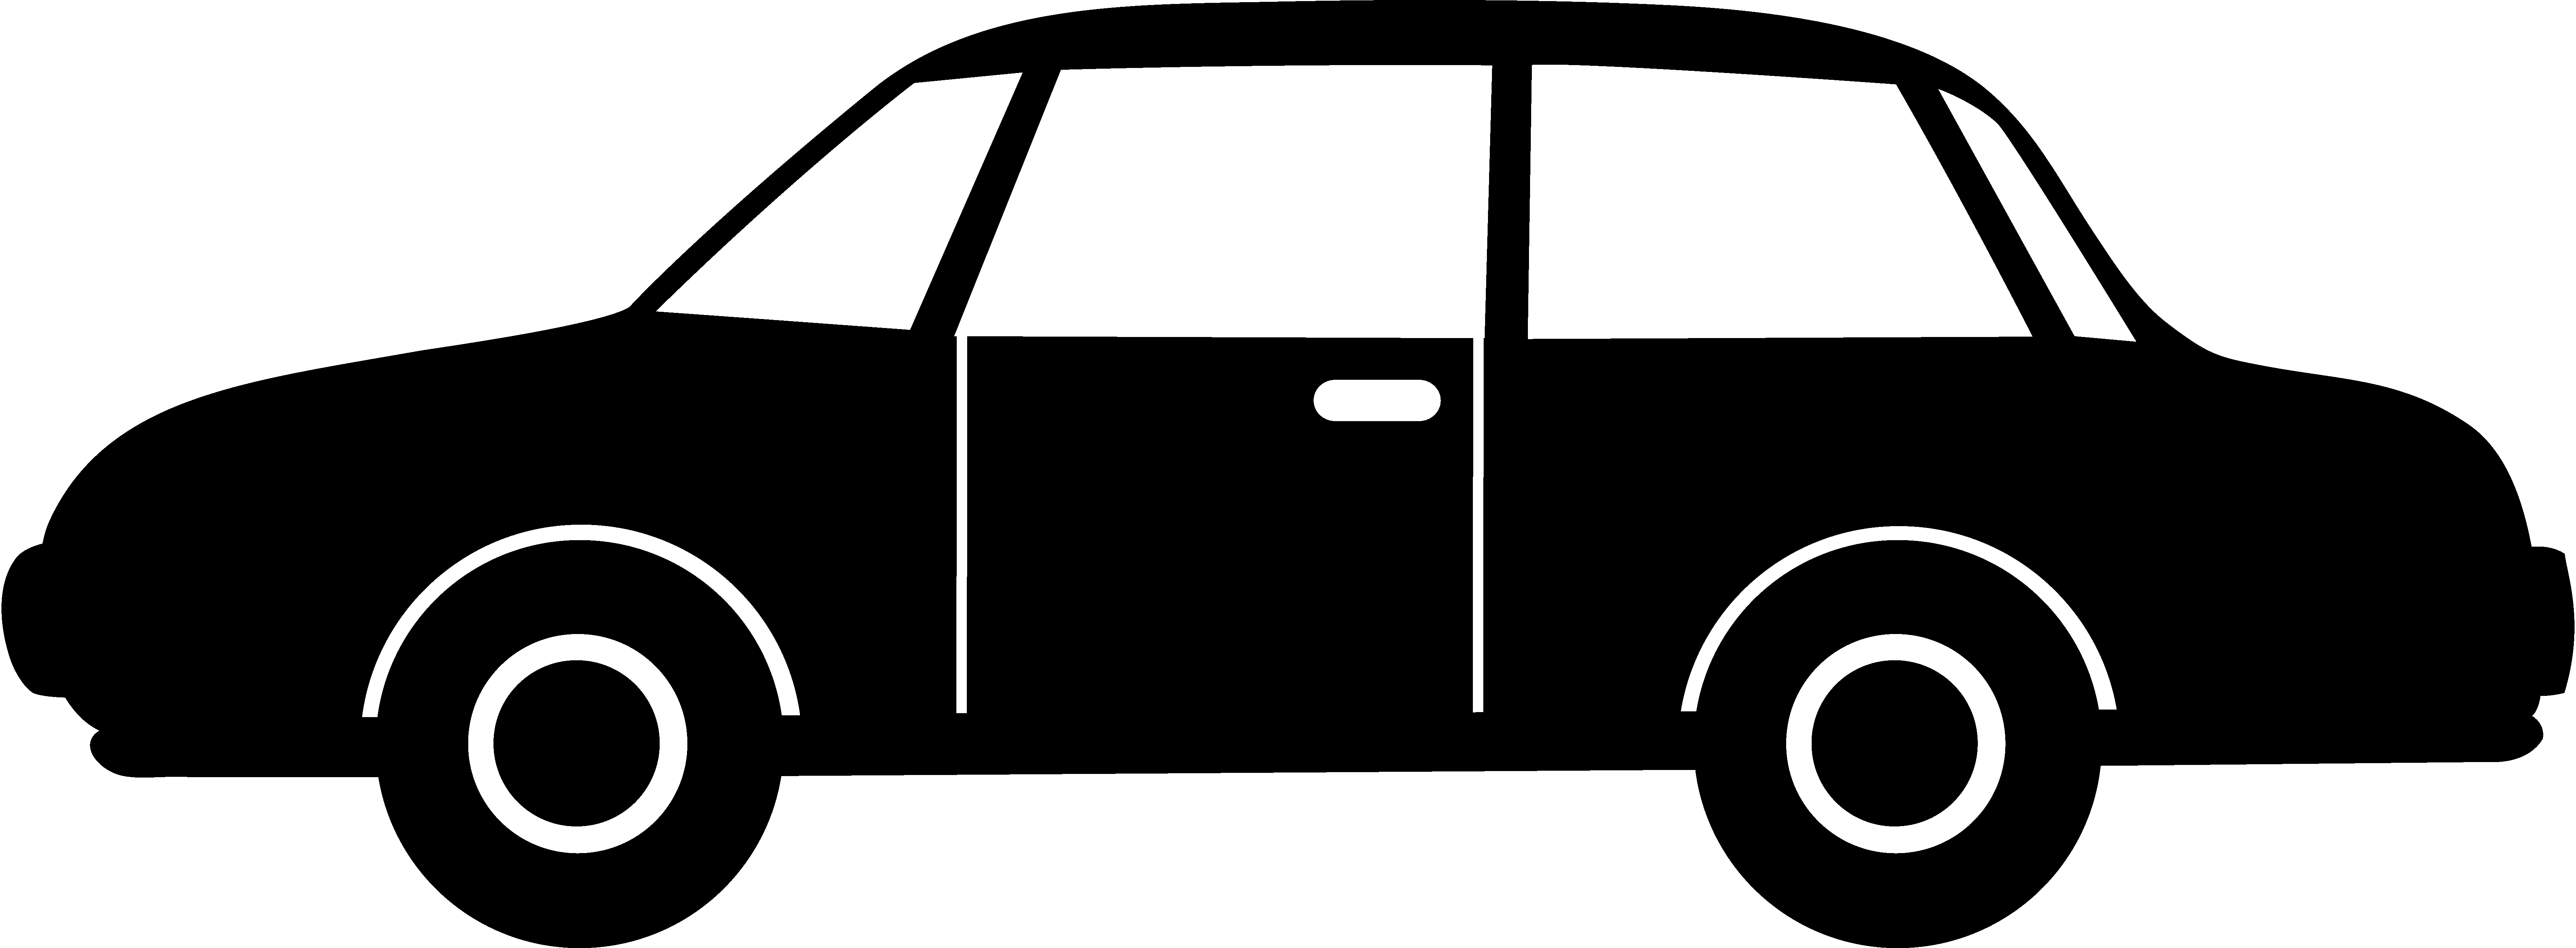 Mustang Car Clipart Black And White | Clipart Panda - Free Clipart ...